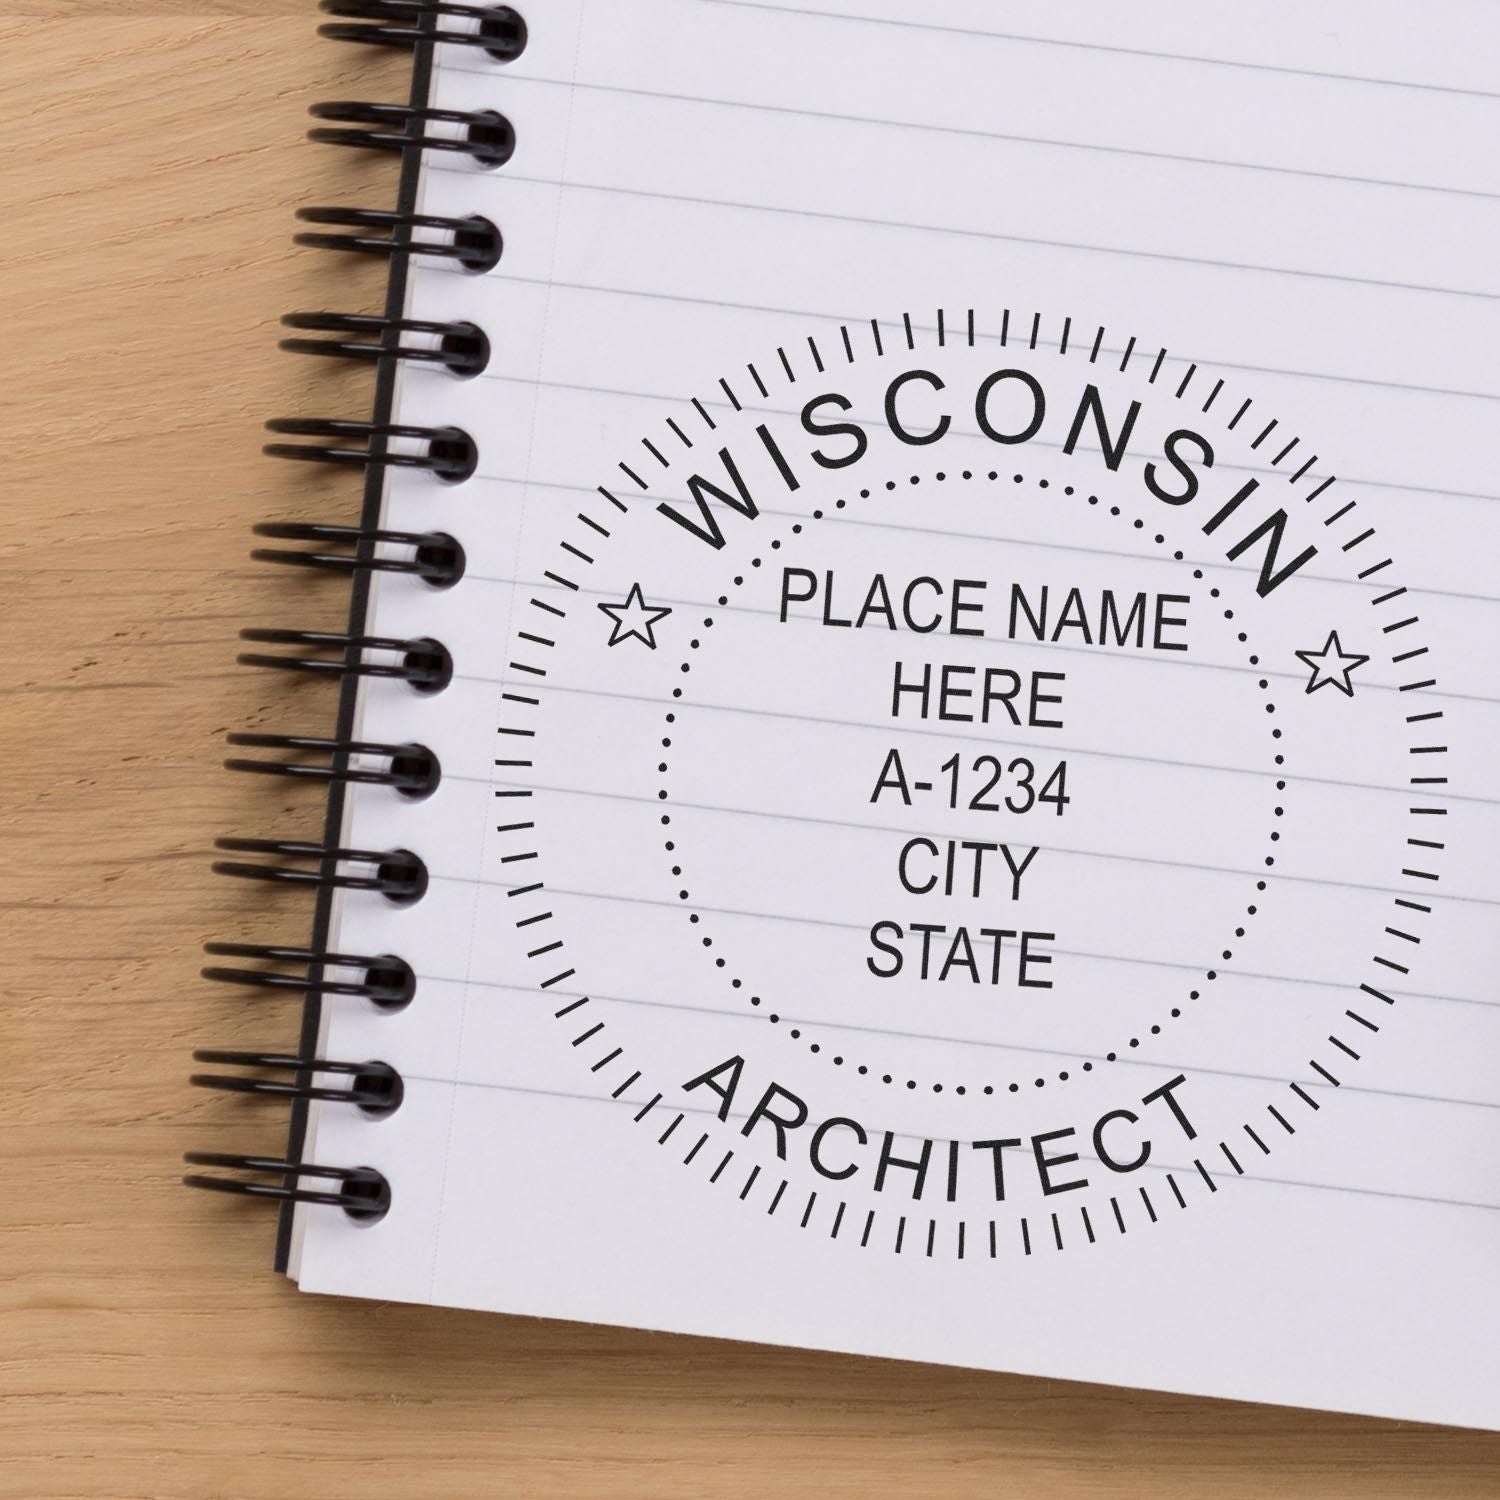 Wisconsin Architect Stamps: An Essential Tool for Architectural Professionals Feature Image